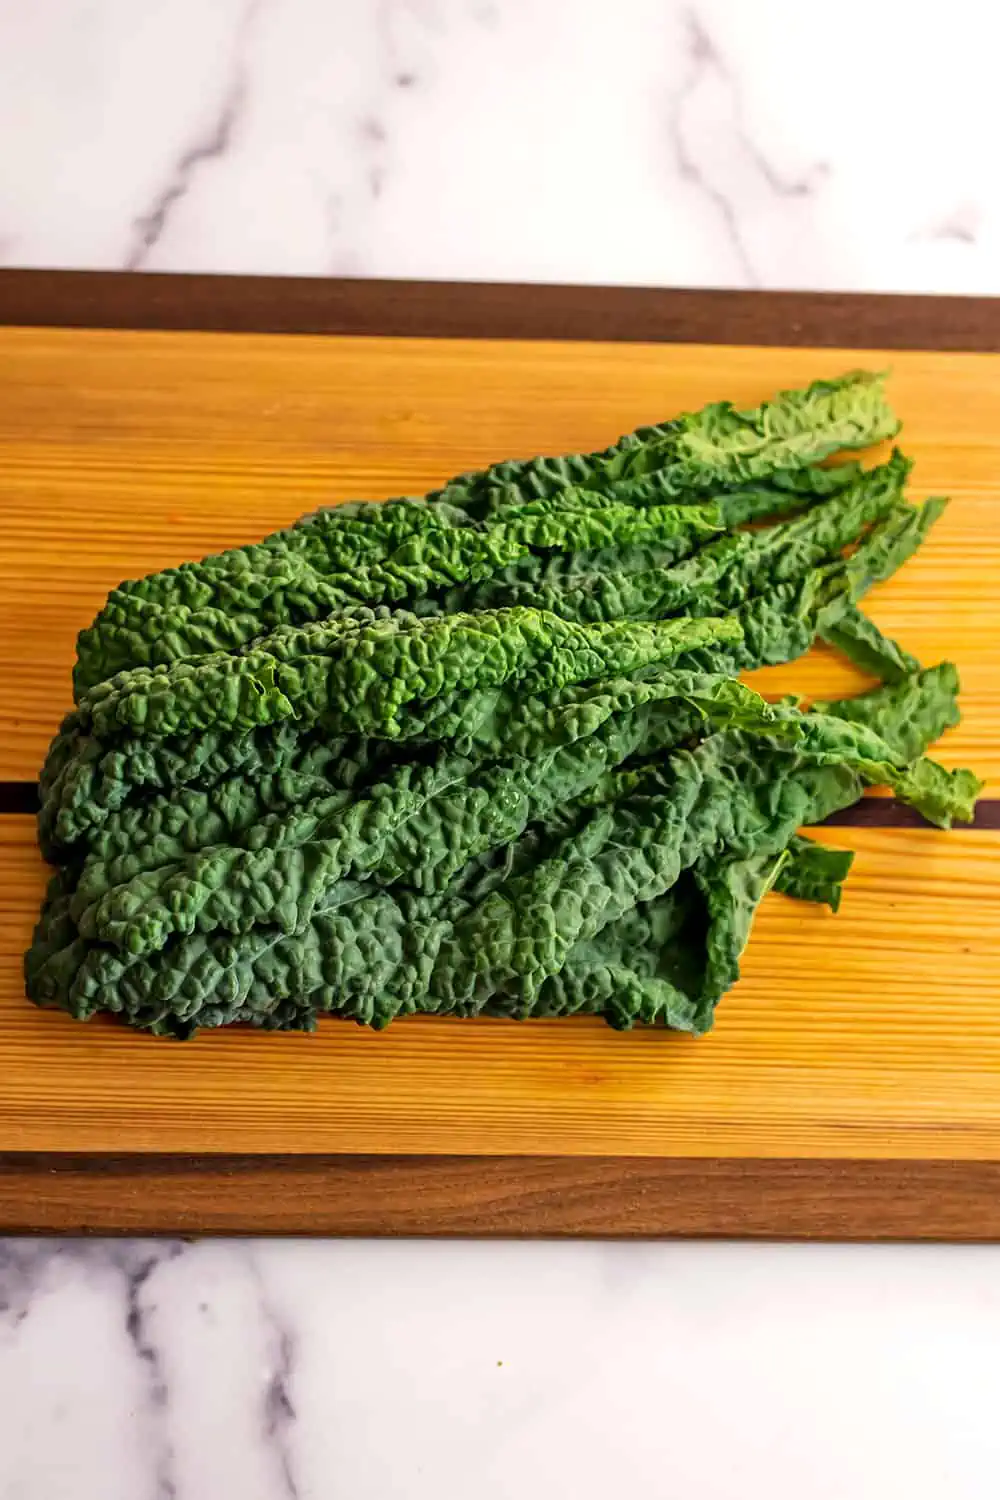 Kale leaves with the stems removed on a wood cutting board.